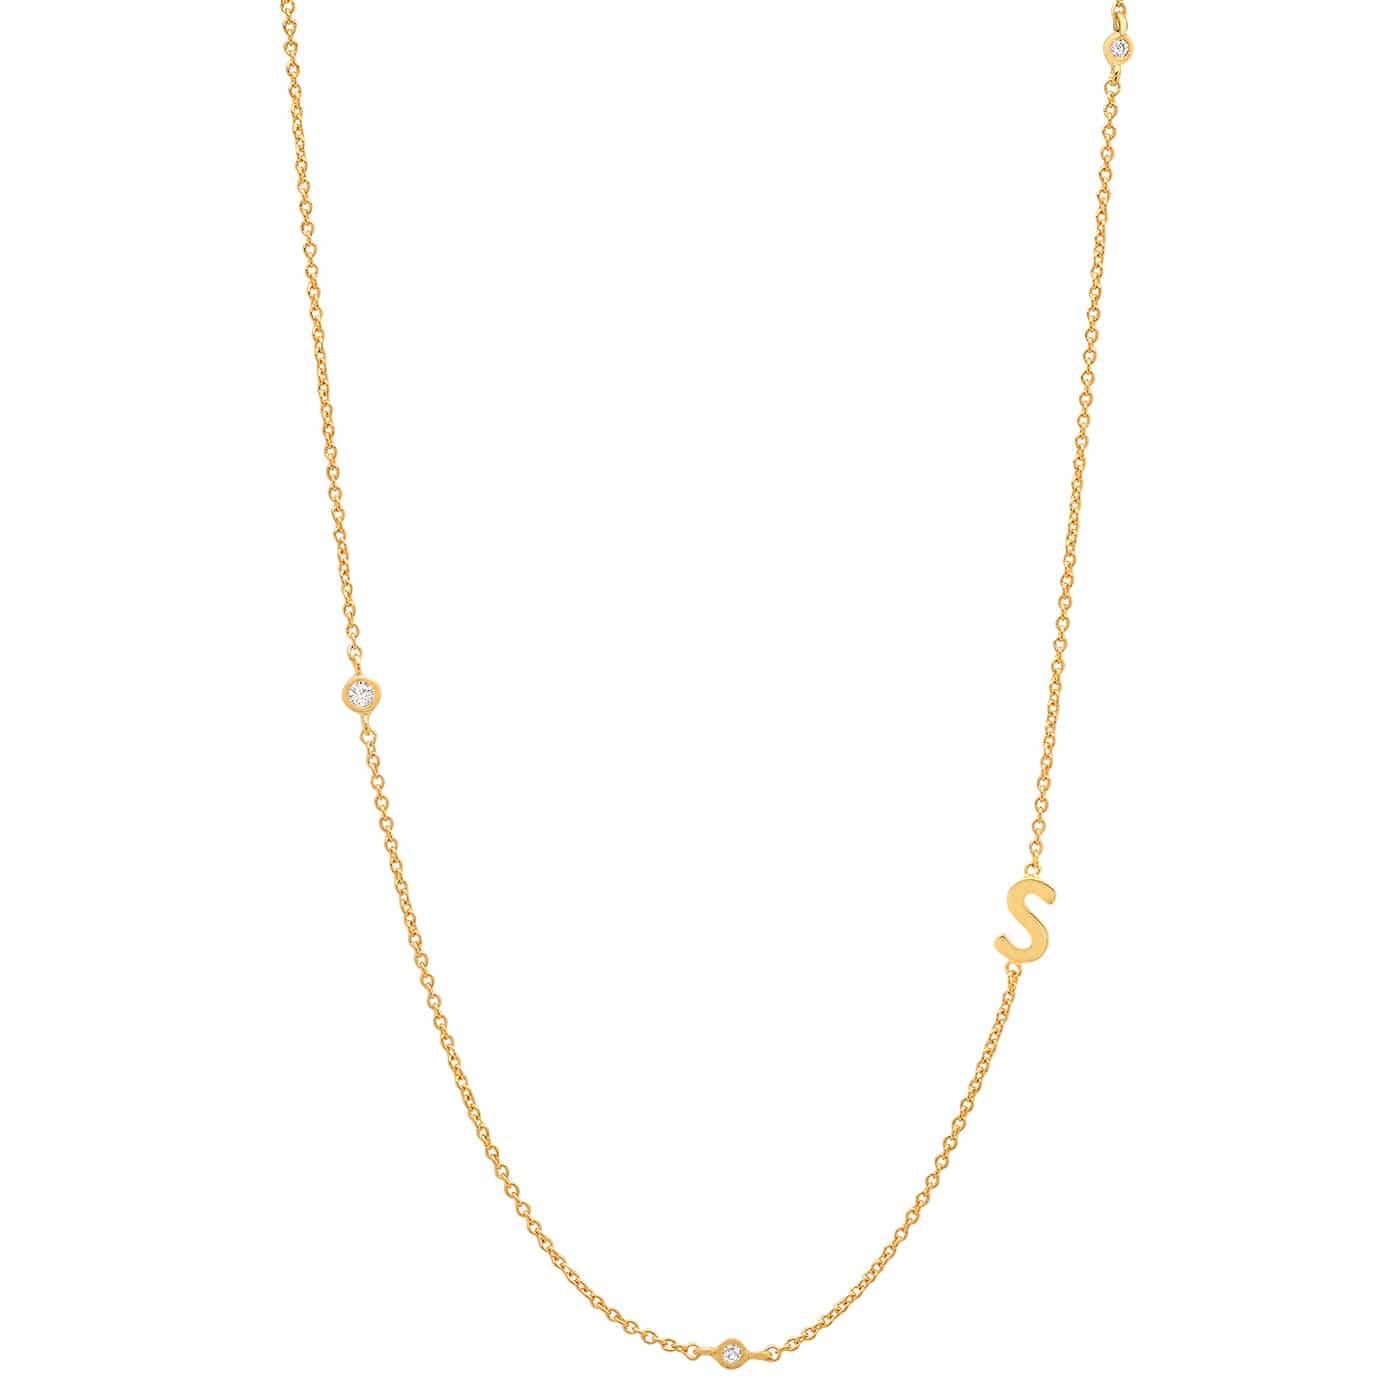 TAI JEWELRY Necklace S Sideways Initial Gold Necklace With CZ Accents